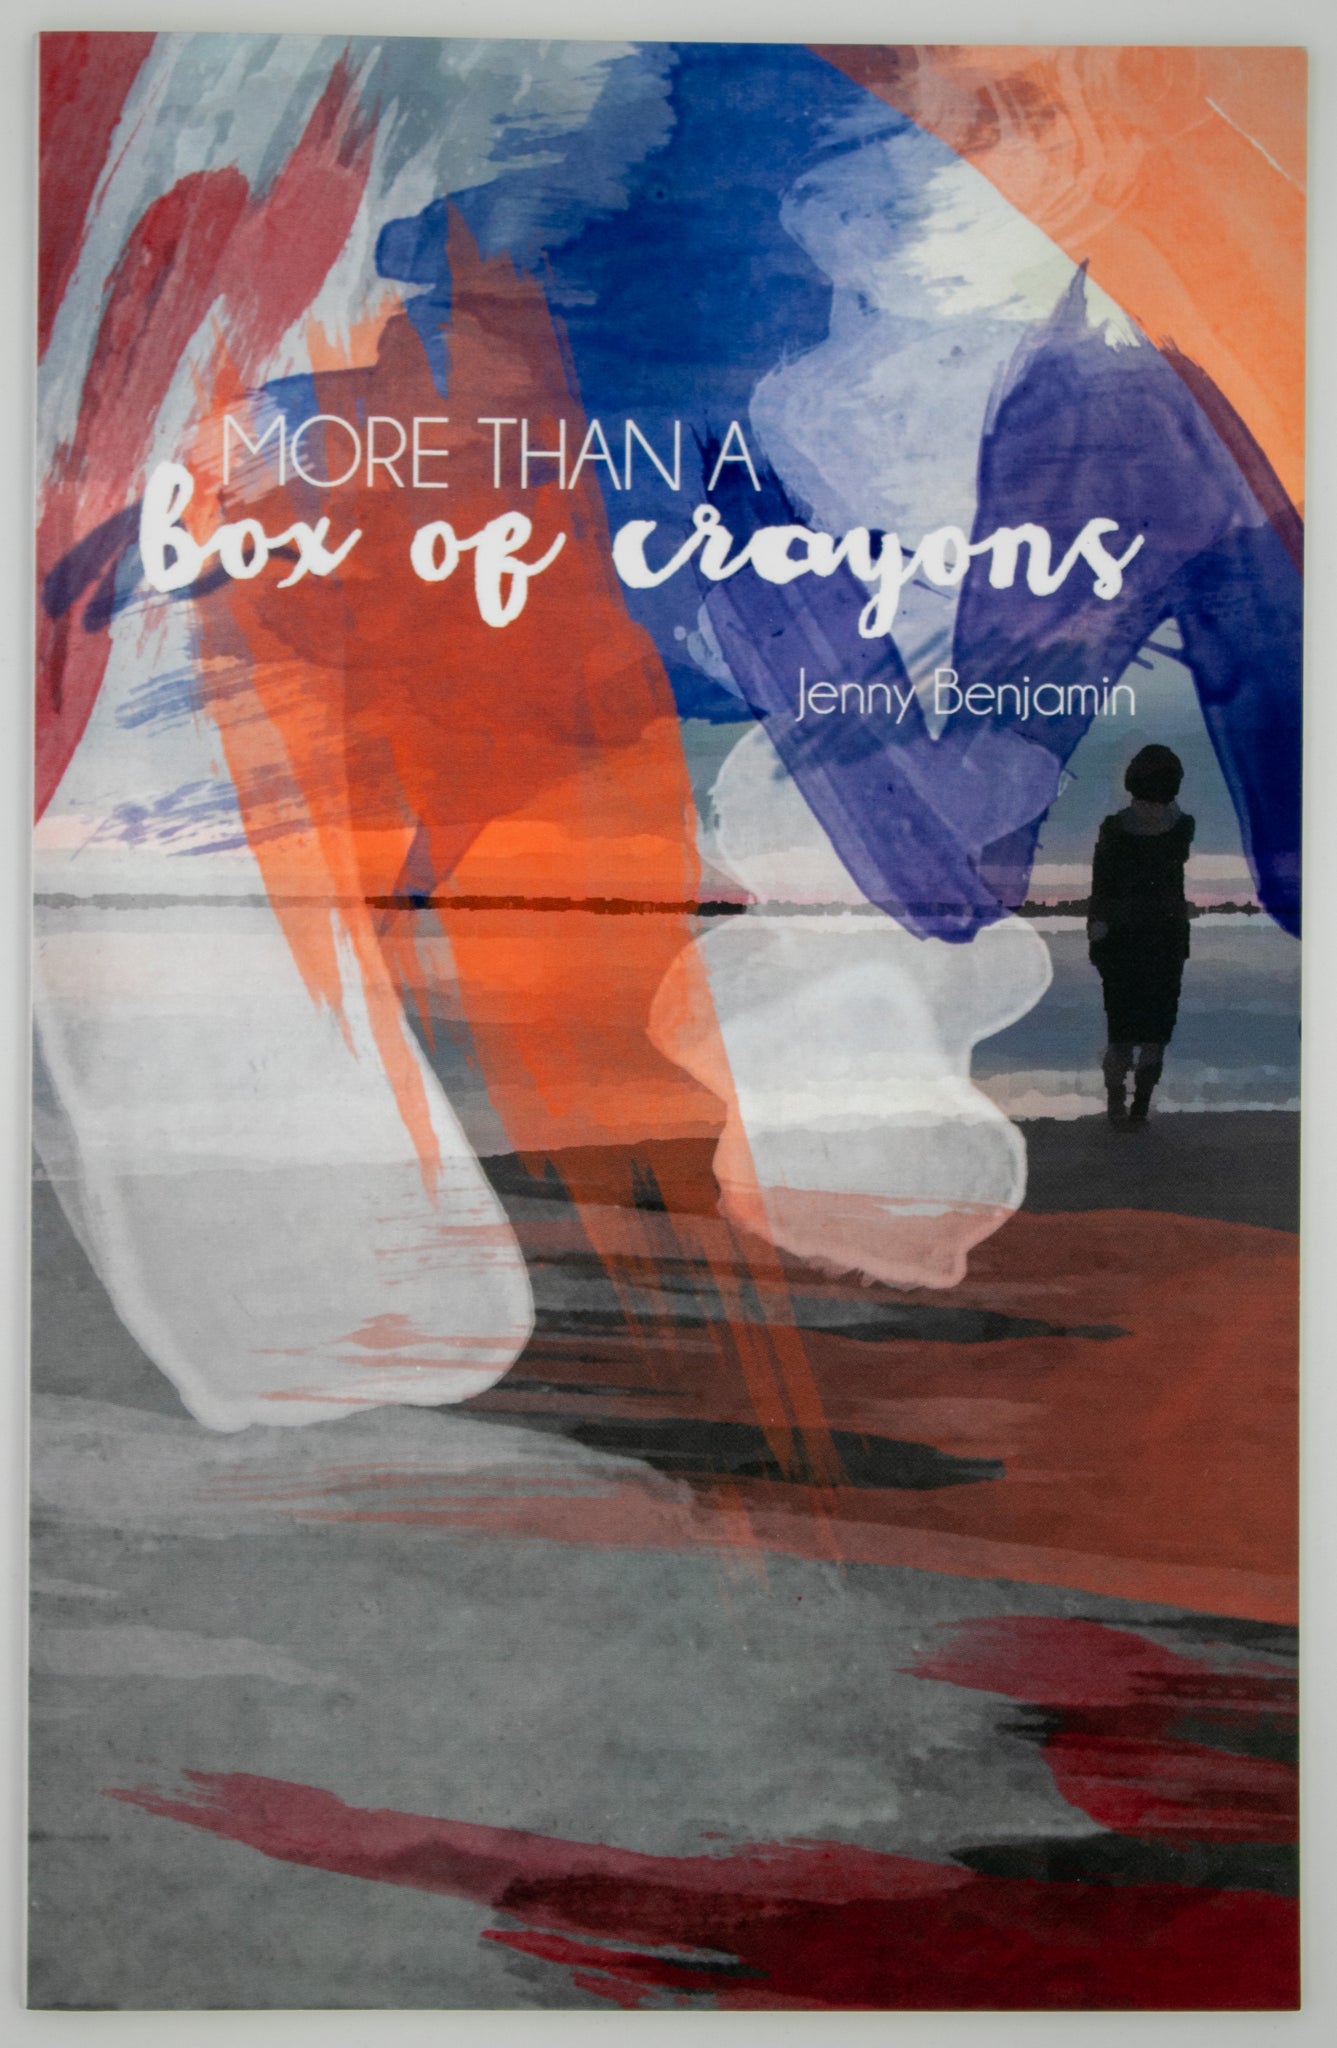 More Than a Box of Crayons: Poems